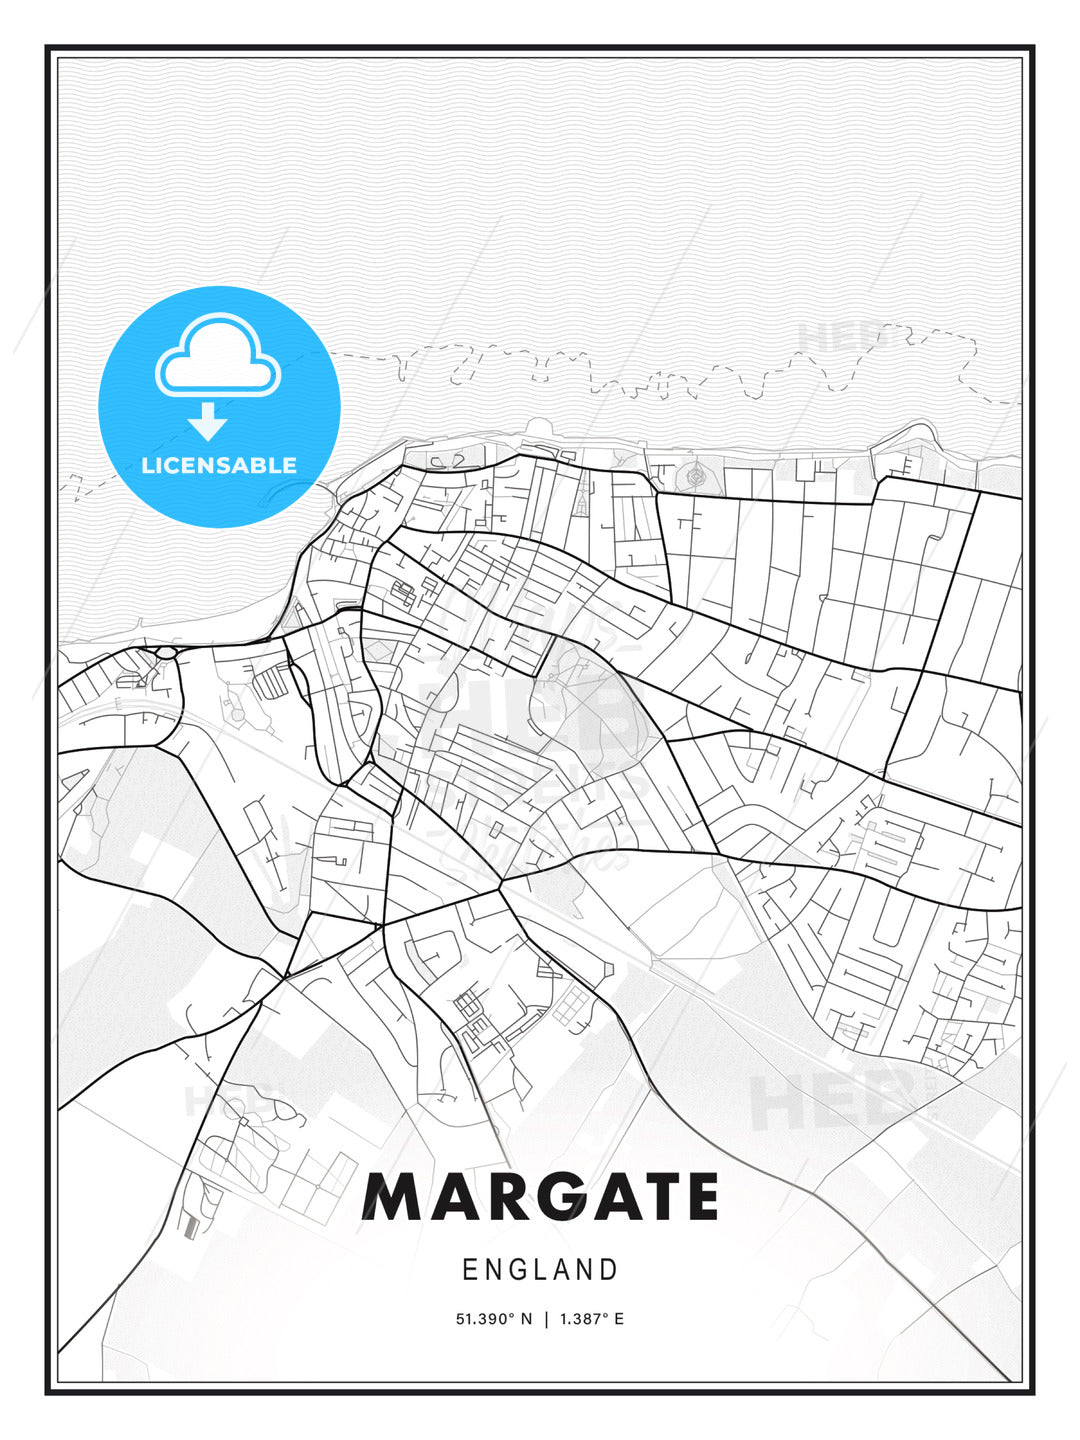 Margate, England, Modern Print Template in Various Formats - HEBSTREITS Sketches